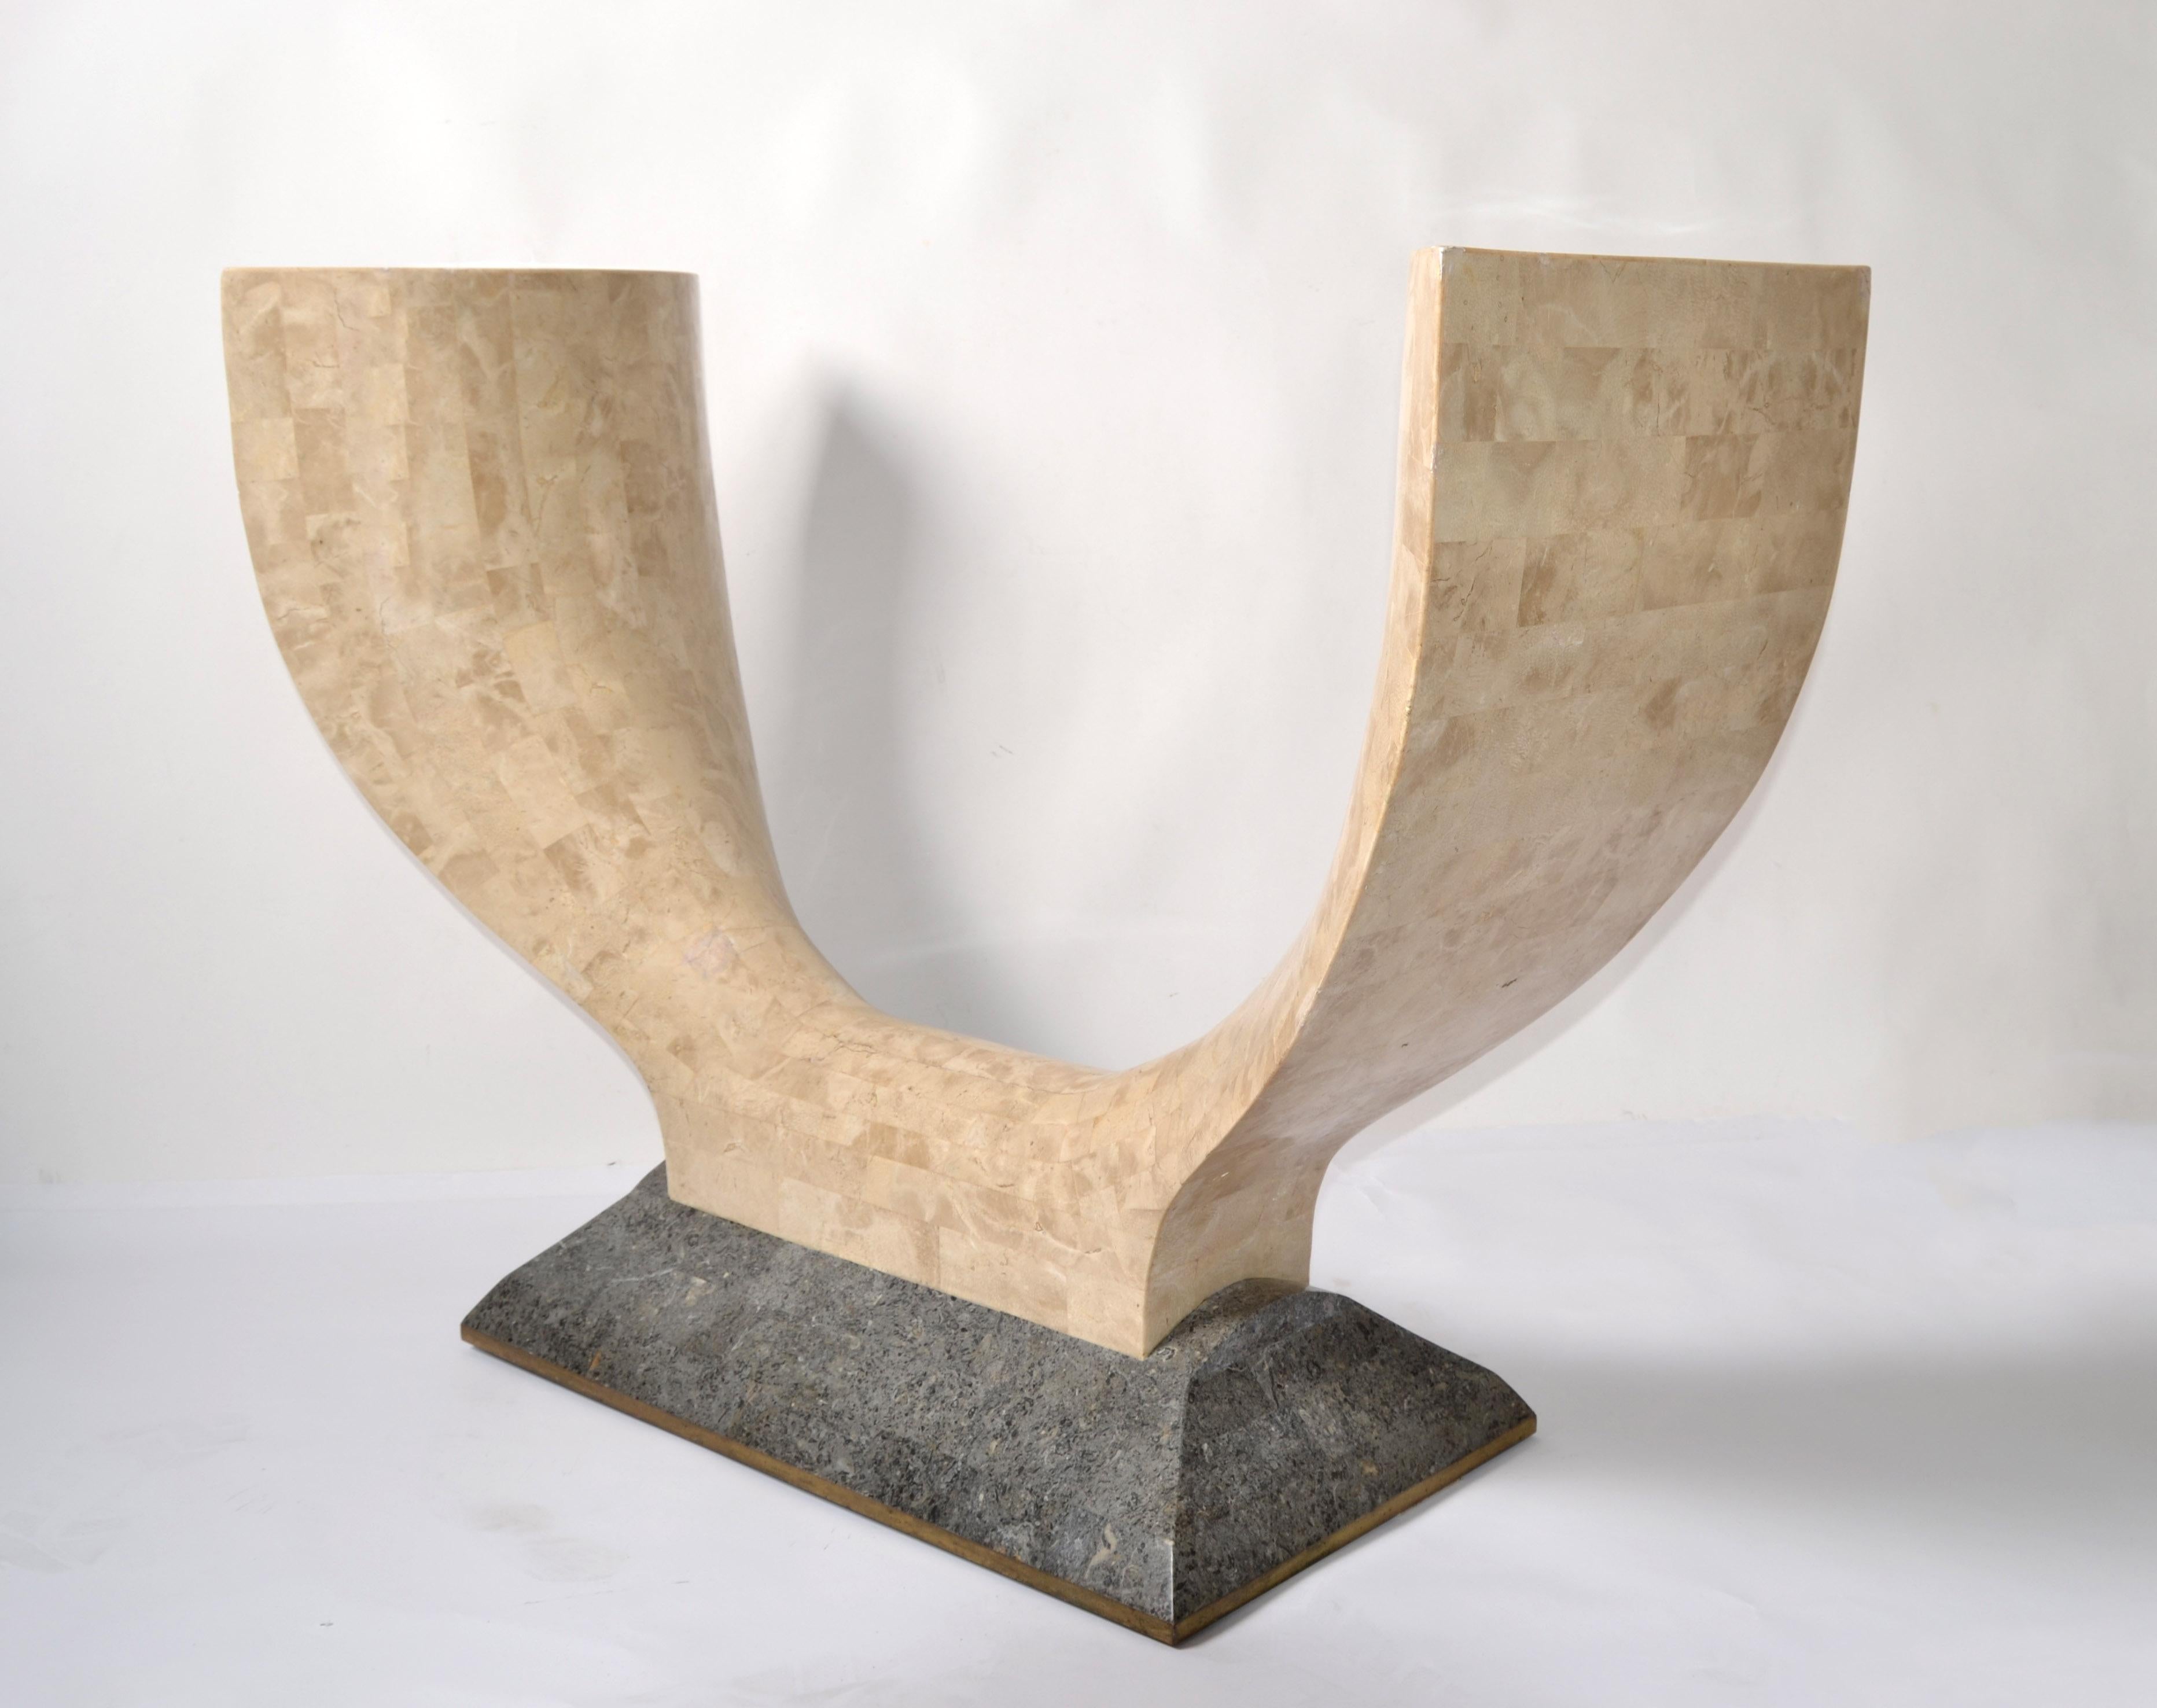 Art Deco Style Wishbone Shaped Console Table made in circa 1980 by Maitland Smith in the Philippines.
Features a beige tessellated Stone over wood semi-circle Core mounted on a slat gray marble base with Gold Leaf Border.
The Mid-Century Modern